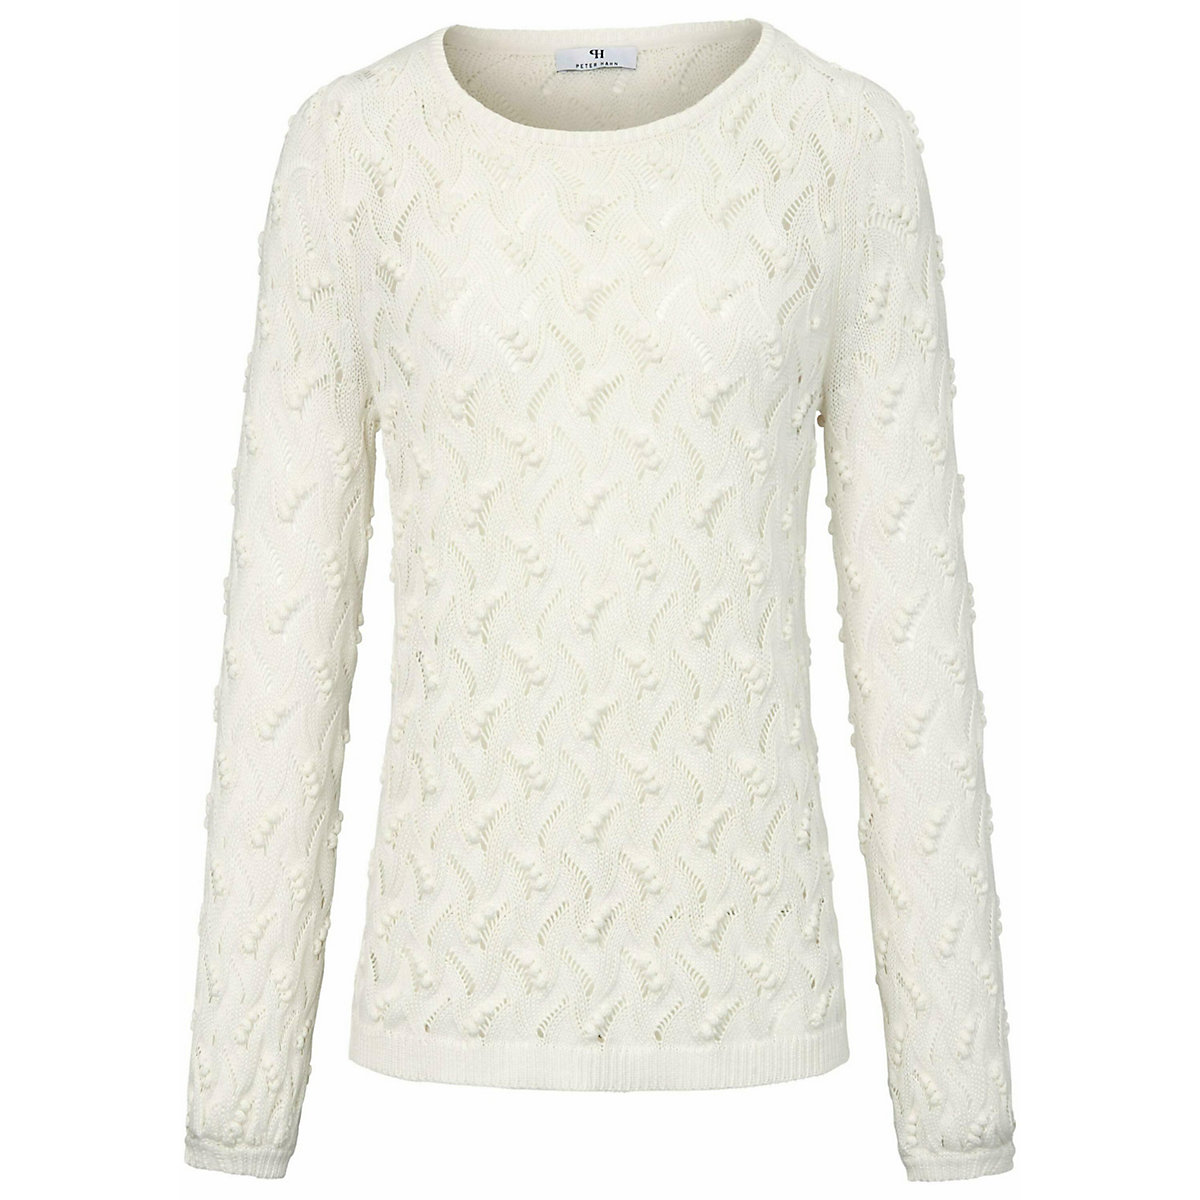 Peter Hahn Pullover Jumper Pullover offwhite